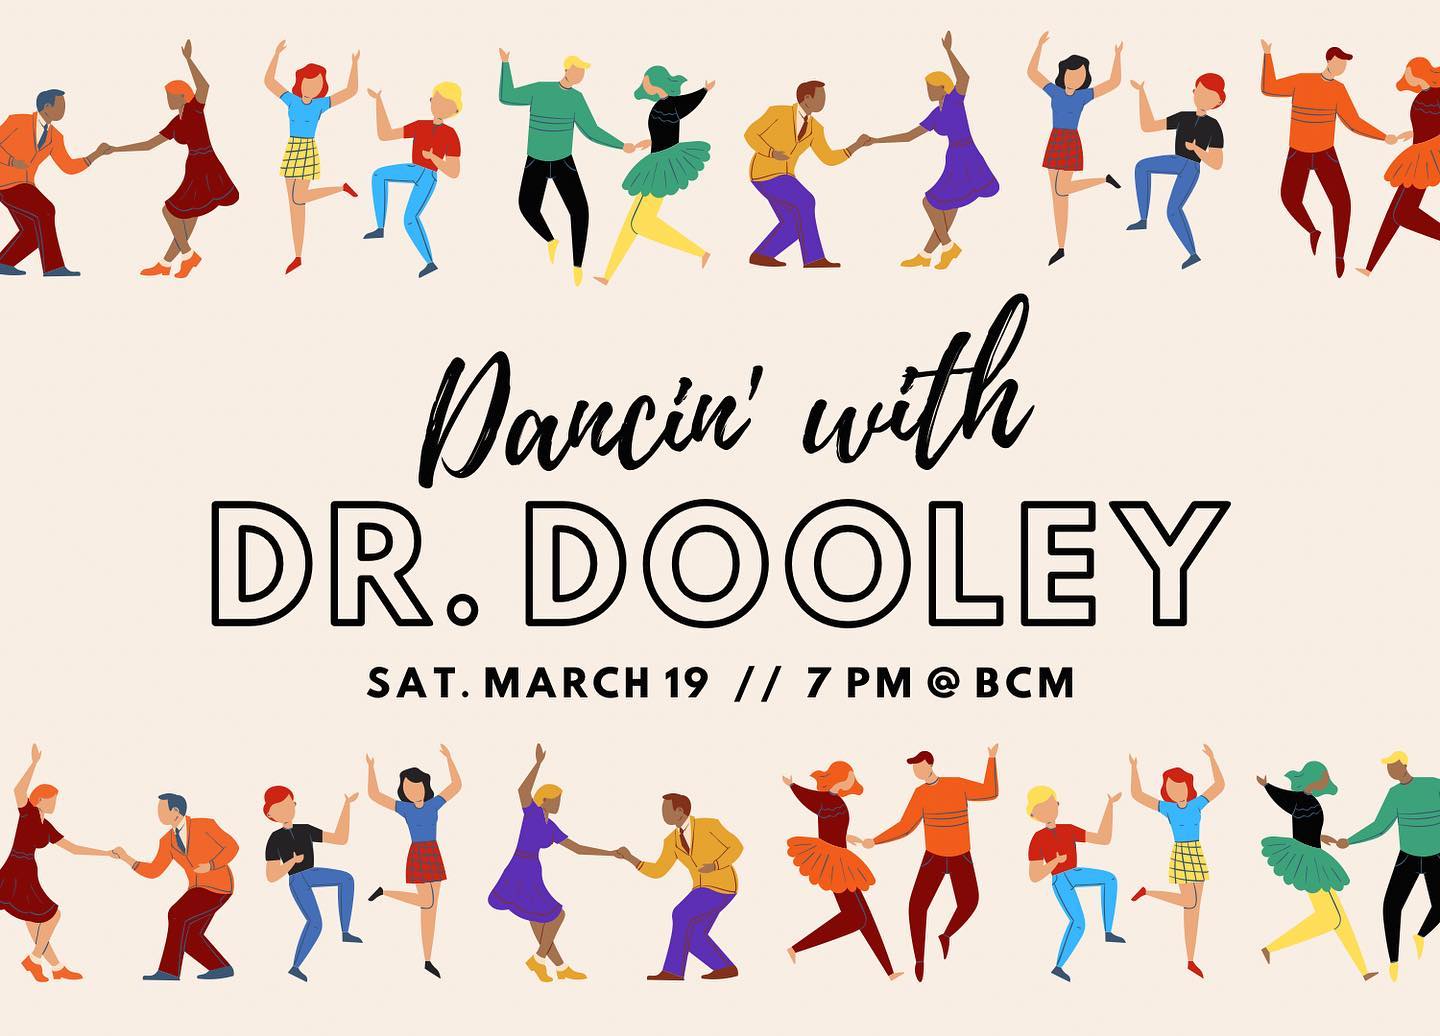 Dancin' with Dr. Dooley promotion